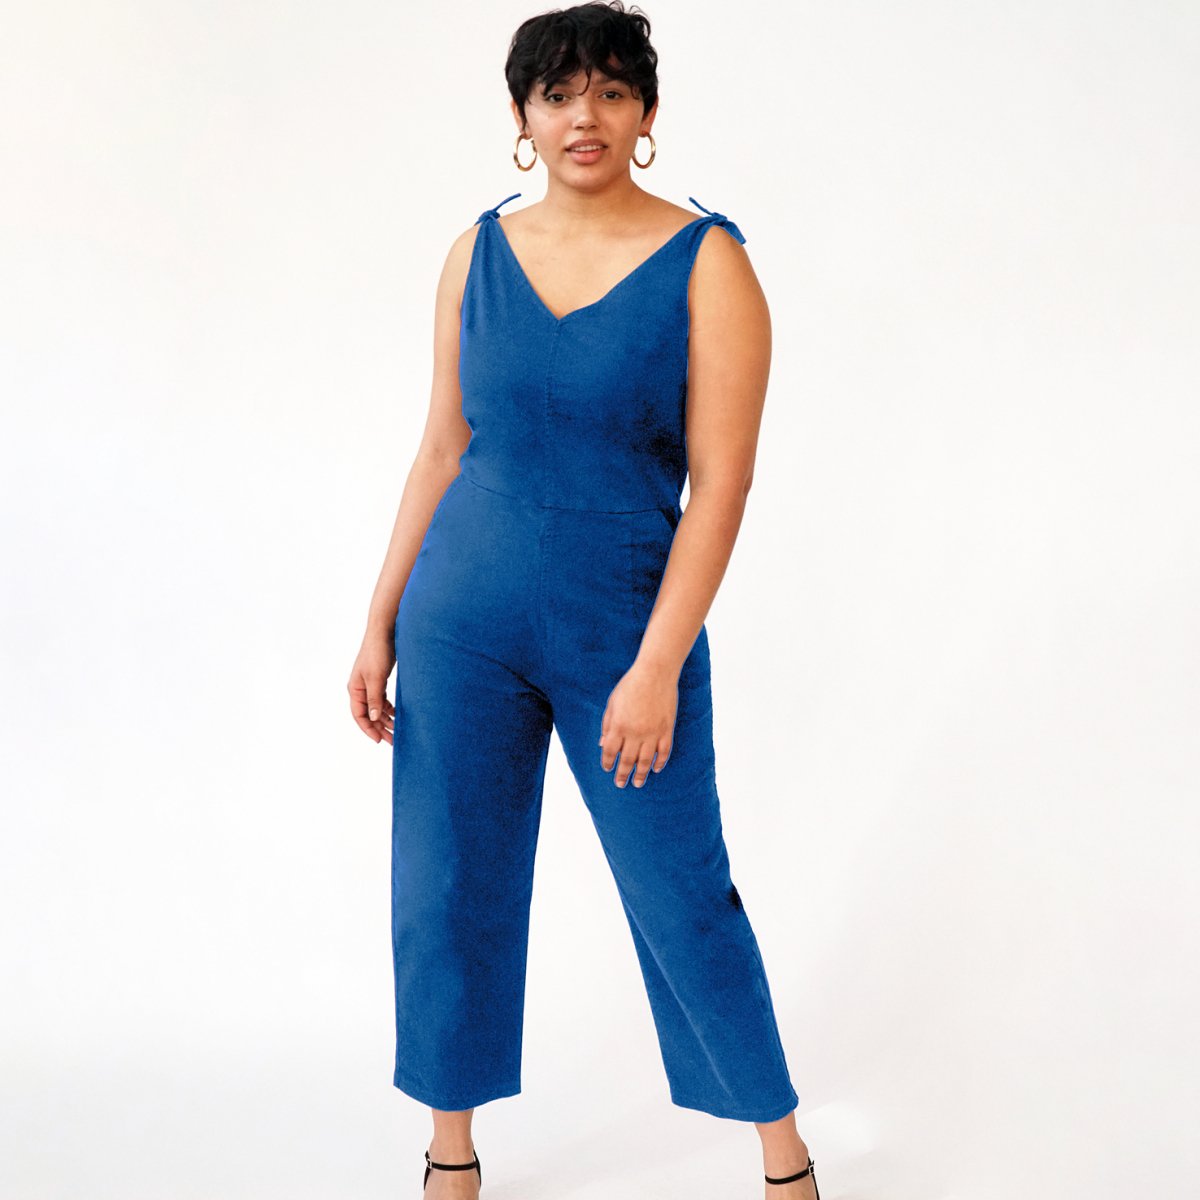 Model wears a bright blue colored jumpsuit with a V-neckline and tie up shoulder straps. The Slate Overalls in Royal are designed by Loup and made in New York City, USA.